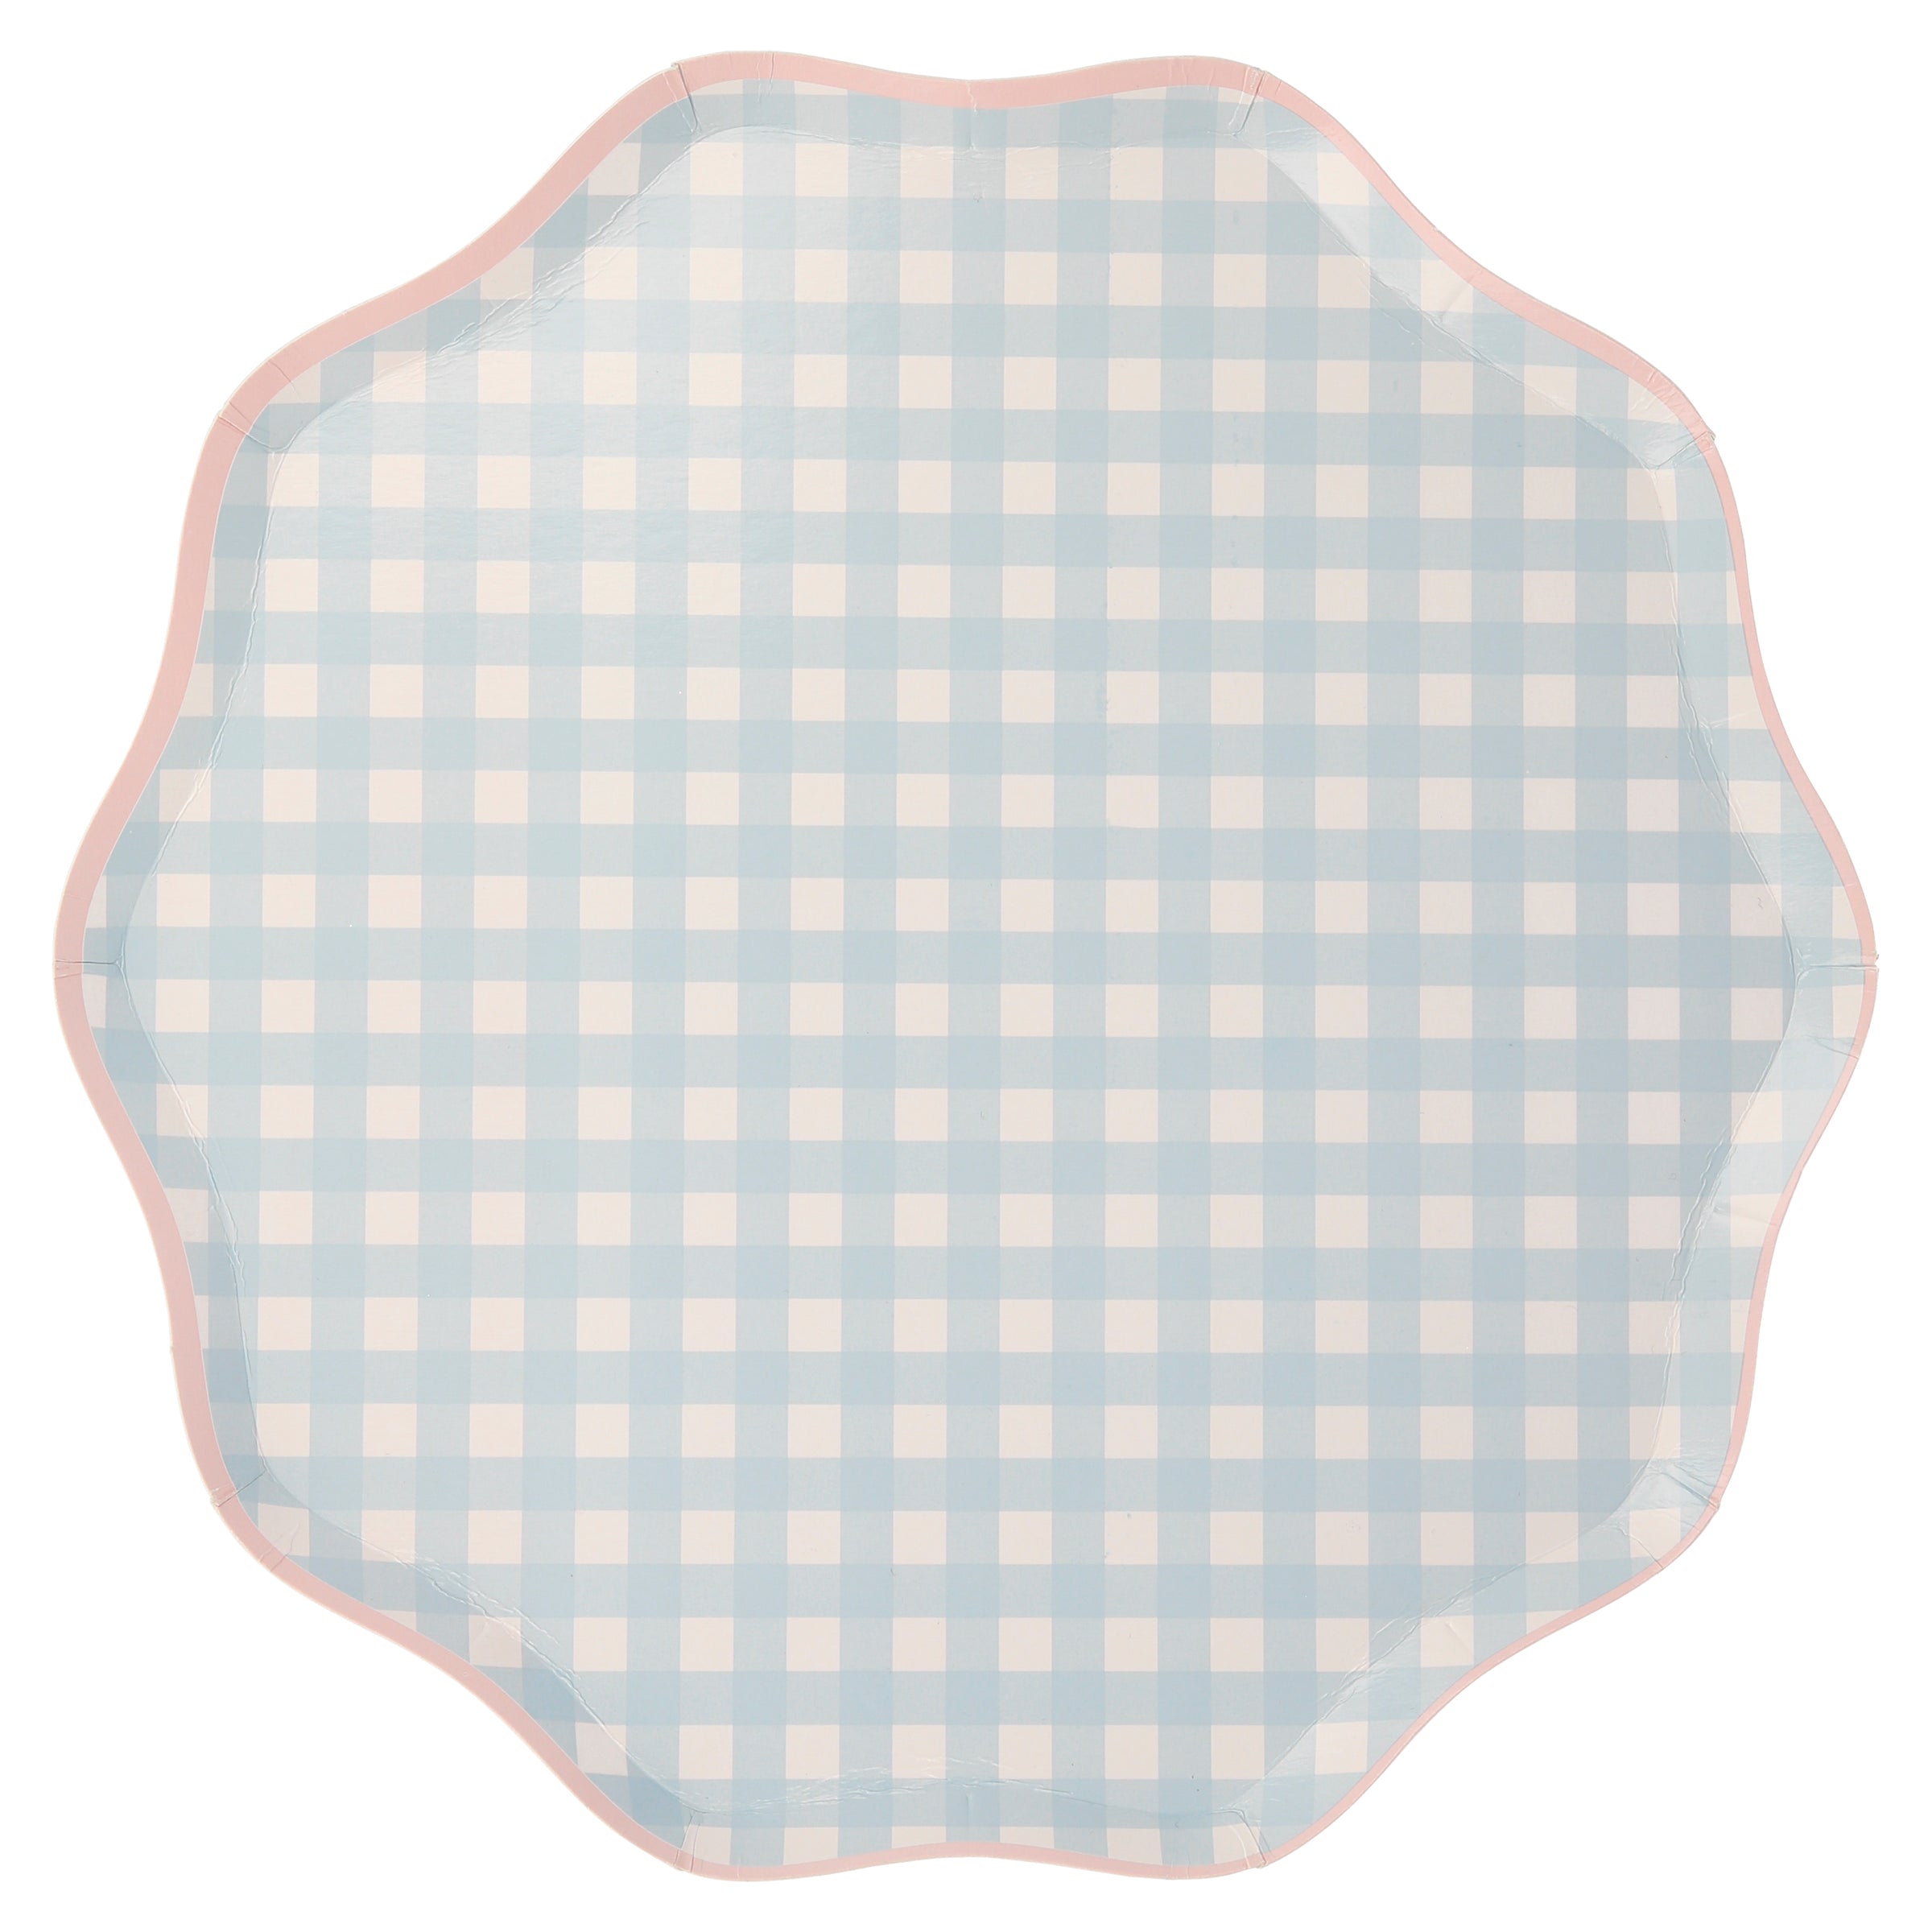 If you're looking for summer party ideas then our gingham dinner plates look amazing.